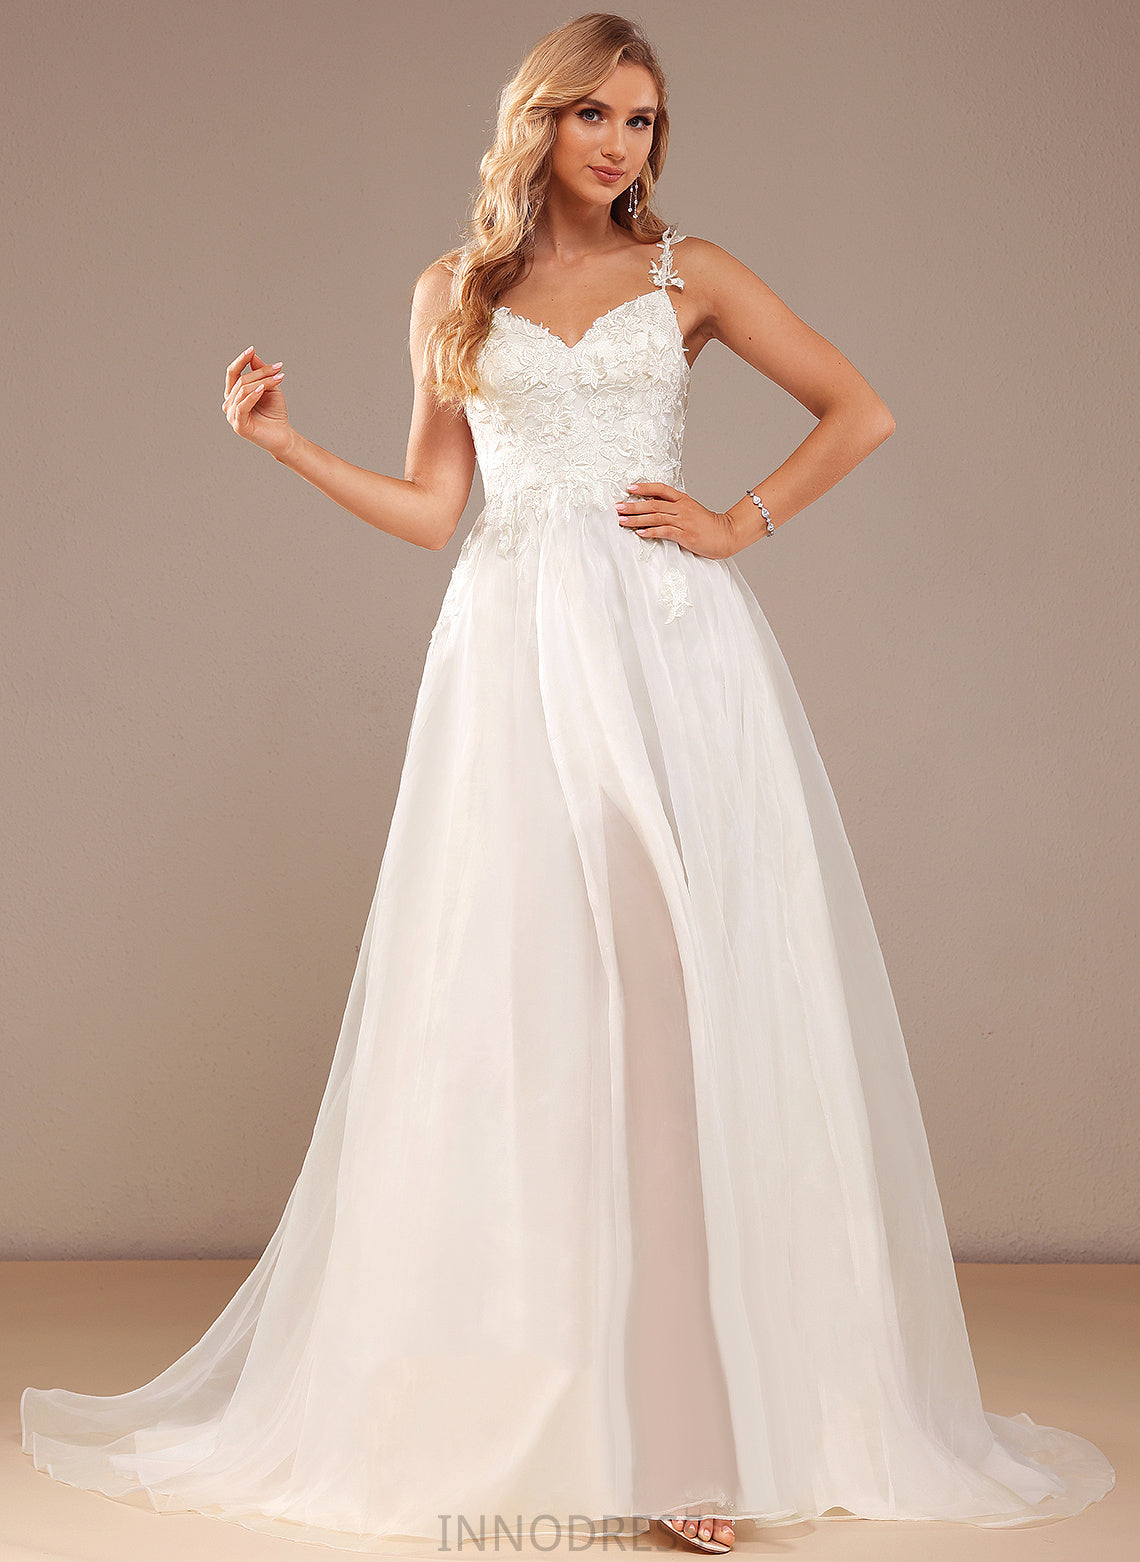 Dress Wedding Dresses Wedding Irene Front Court Split Organza Ball-Gown/Princess Lace Train With Lace V-neck